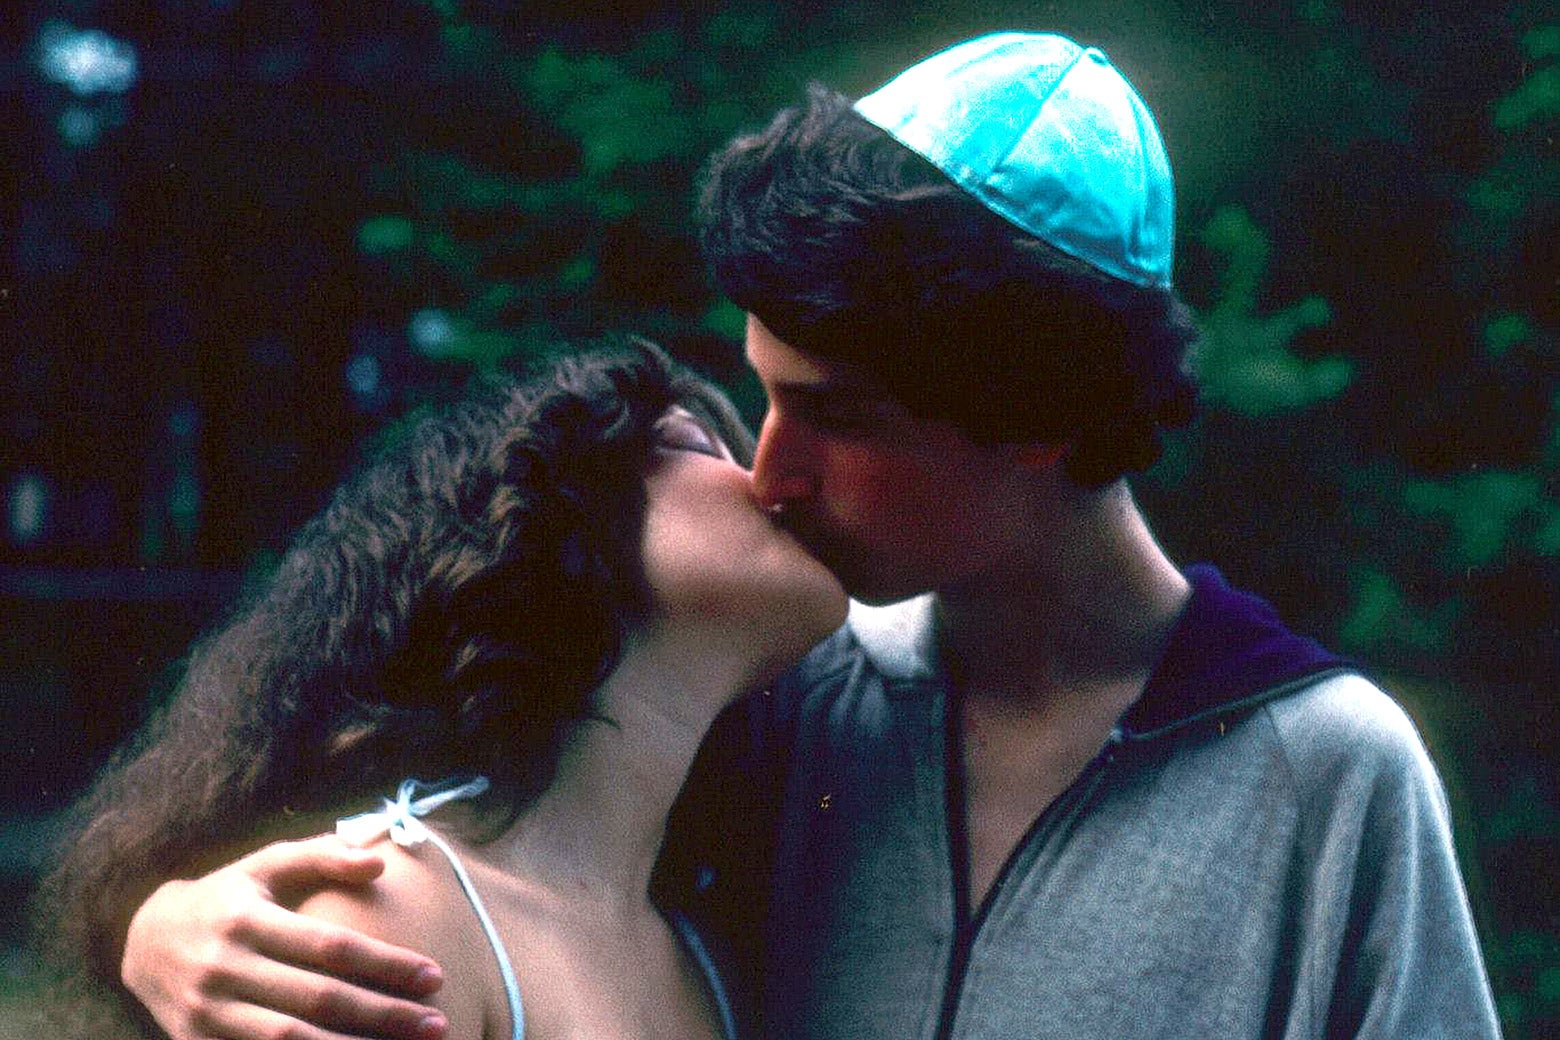 Jewish summer camp hookup scene How this tradition began. pic